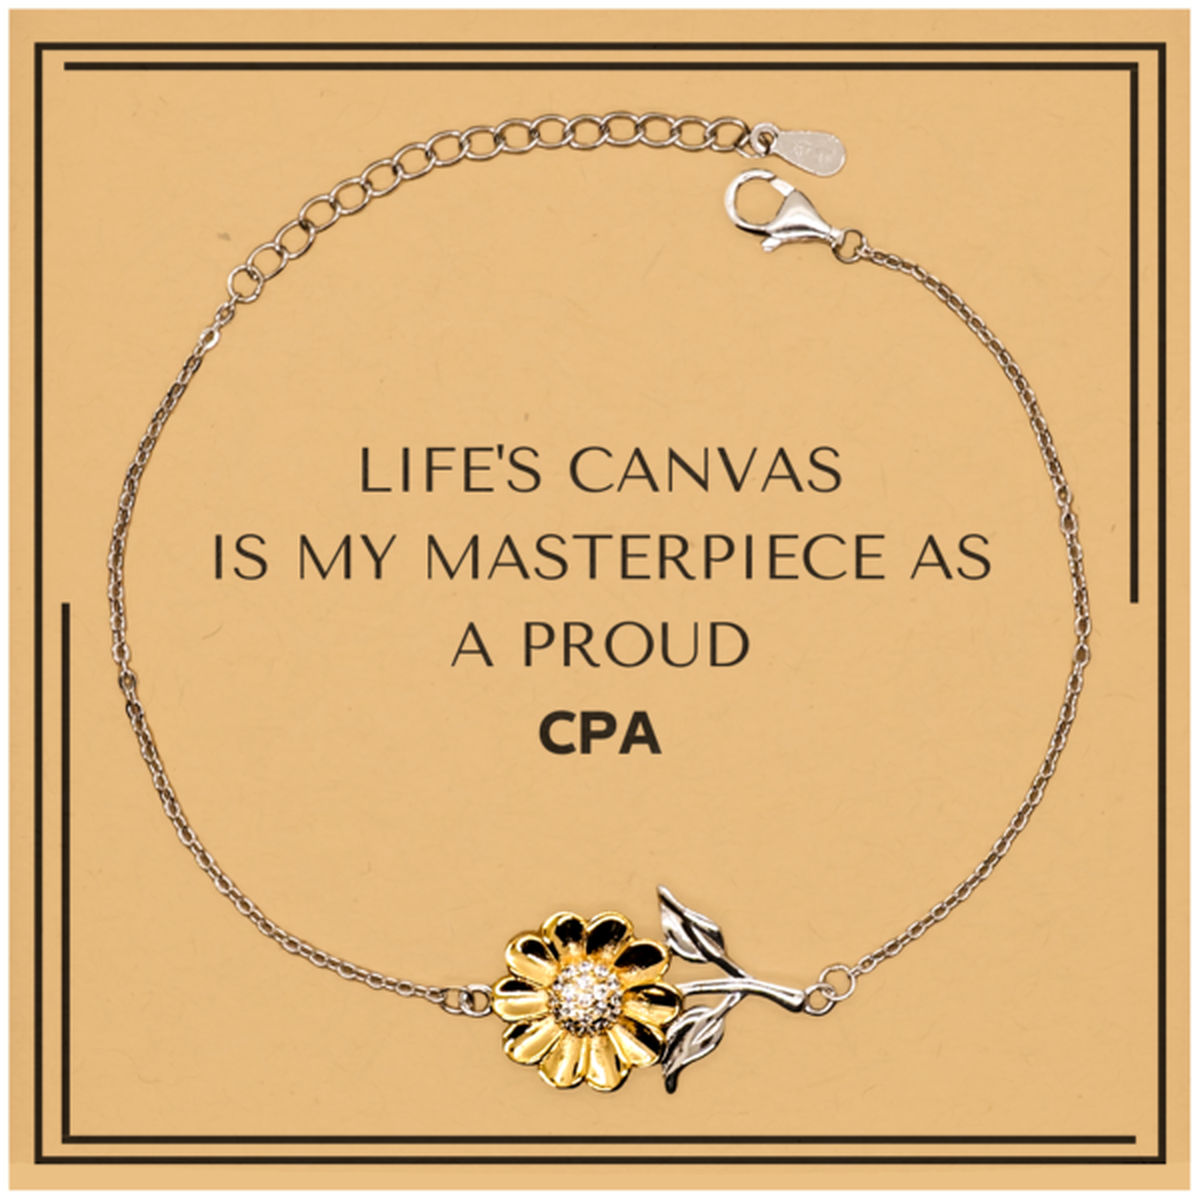 Proud CPA Gifts, Life's canvas is my masterpiece, Epic Birthday Christmas Unique Sunflower Bracelet For CPA, Coworkers, Men, Women, Friends